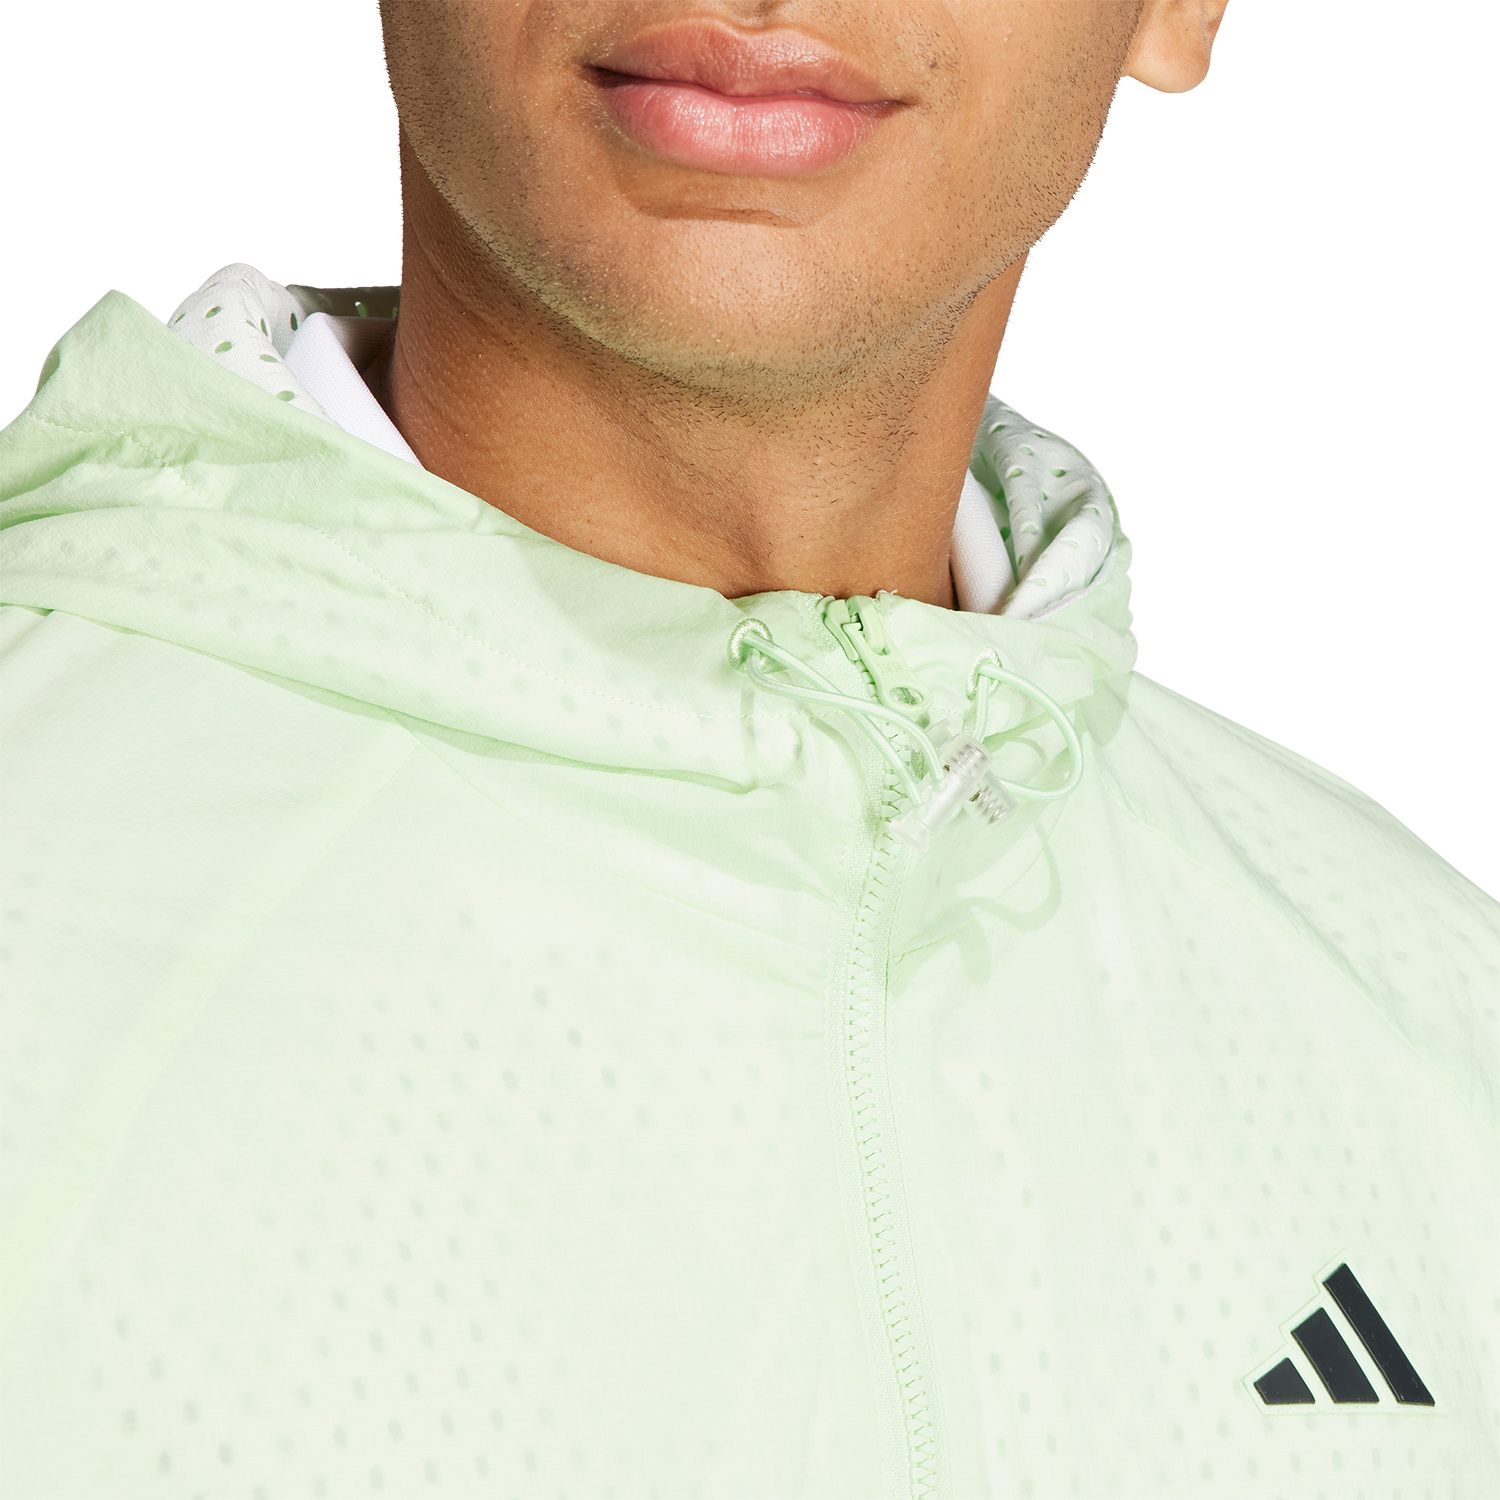 adidas Cover Up Pro Jacket - Semi Green Spark